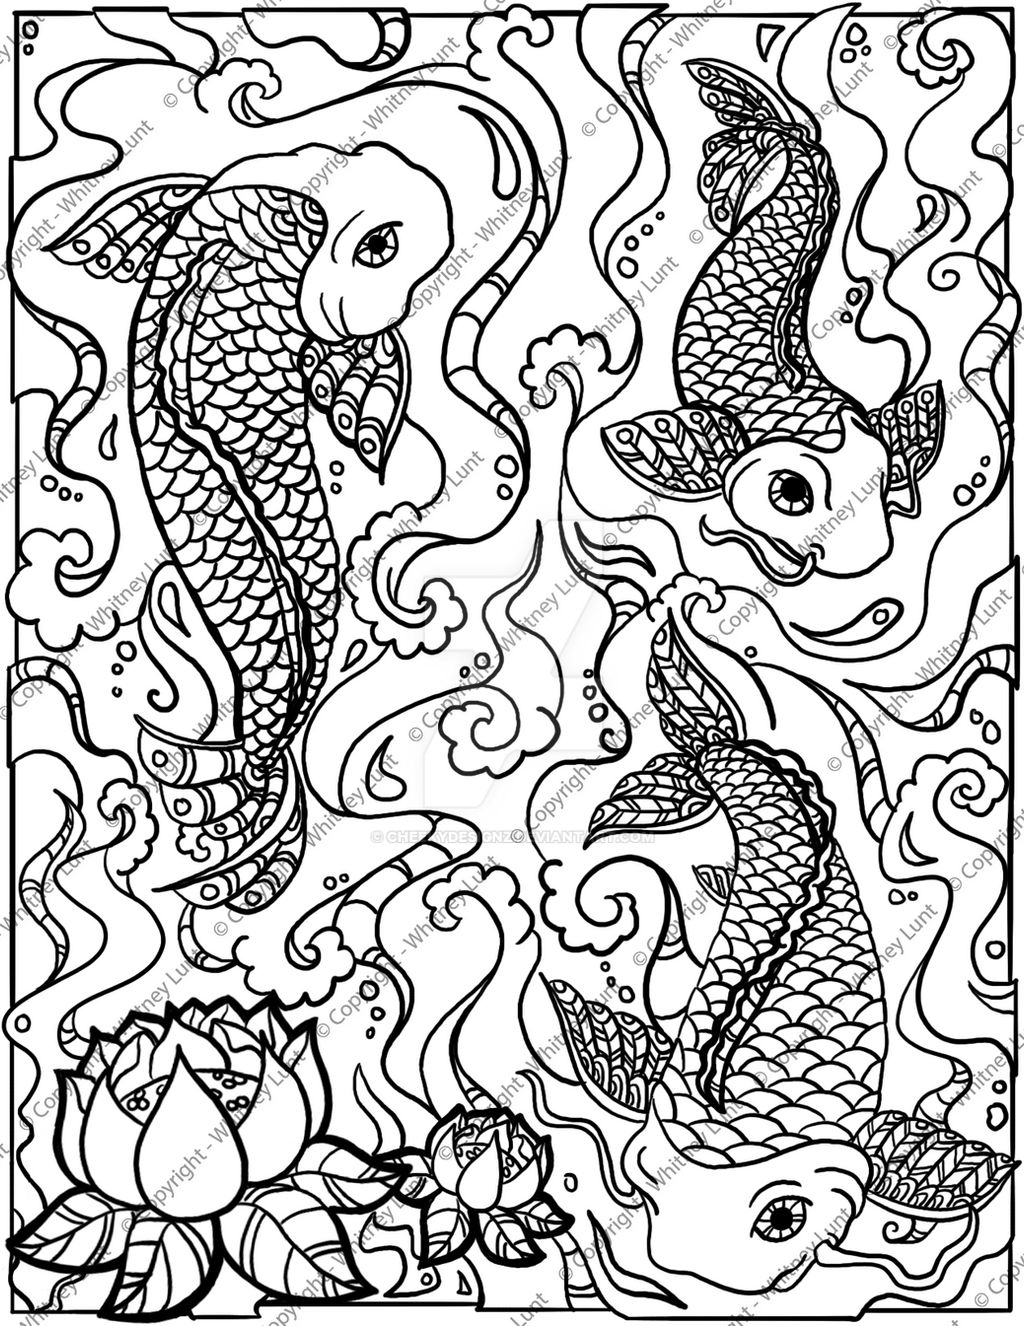 Koi coloring page by cheekydesignz on